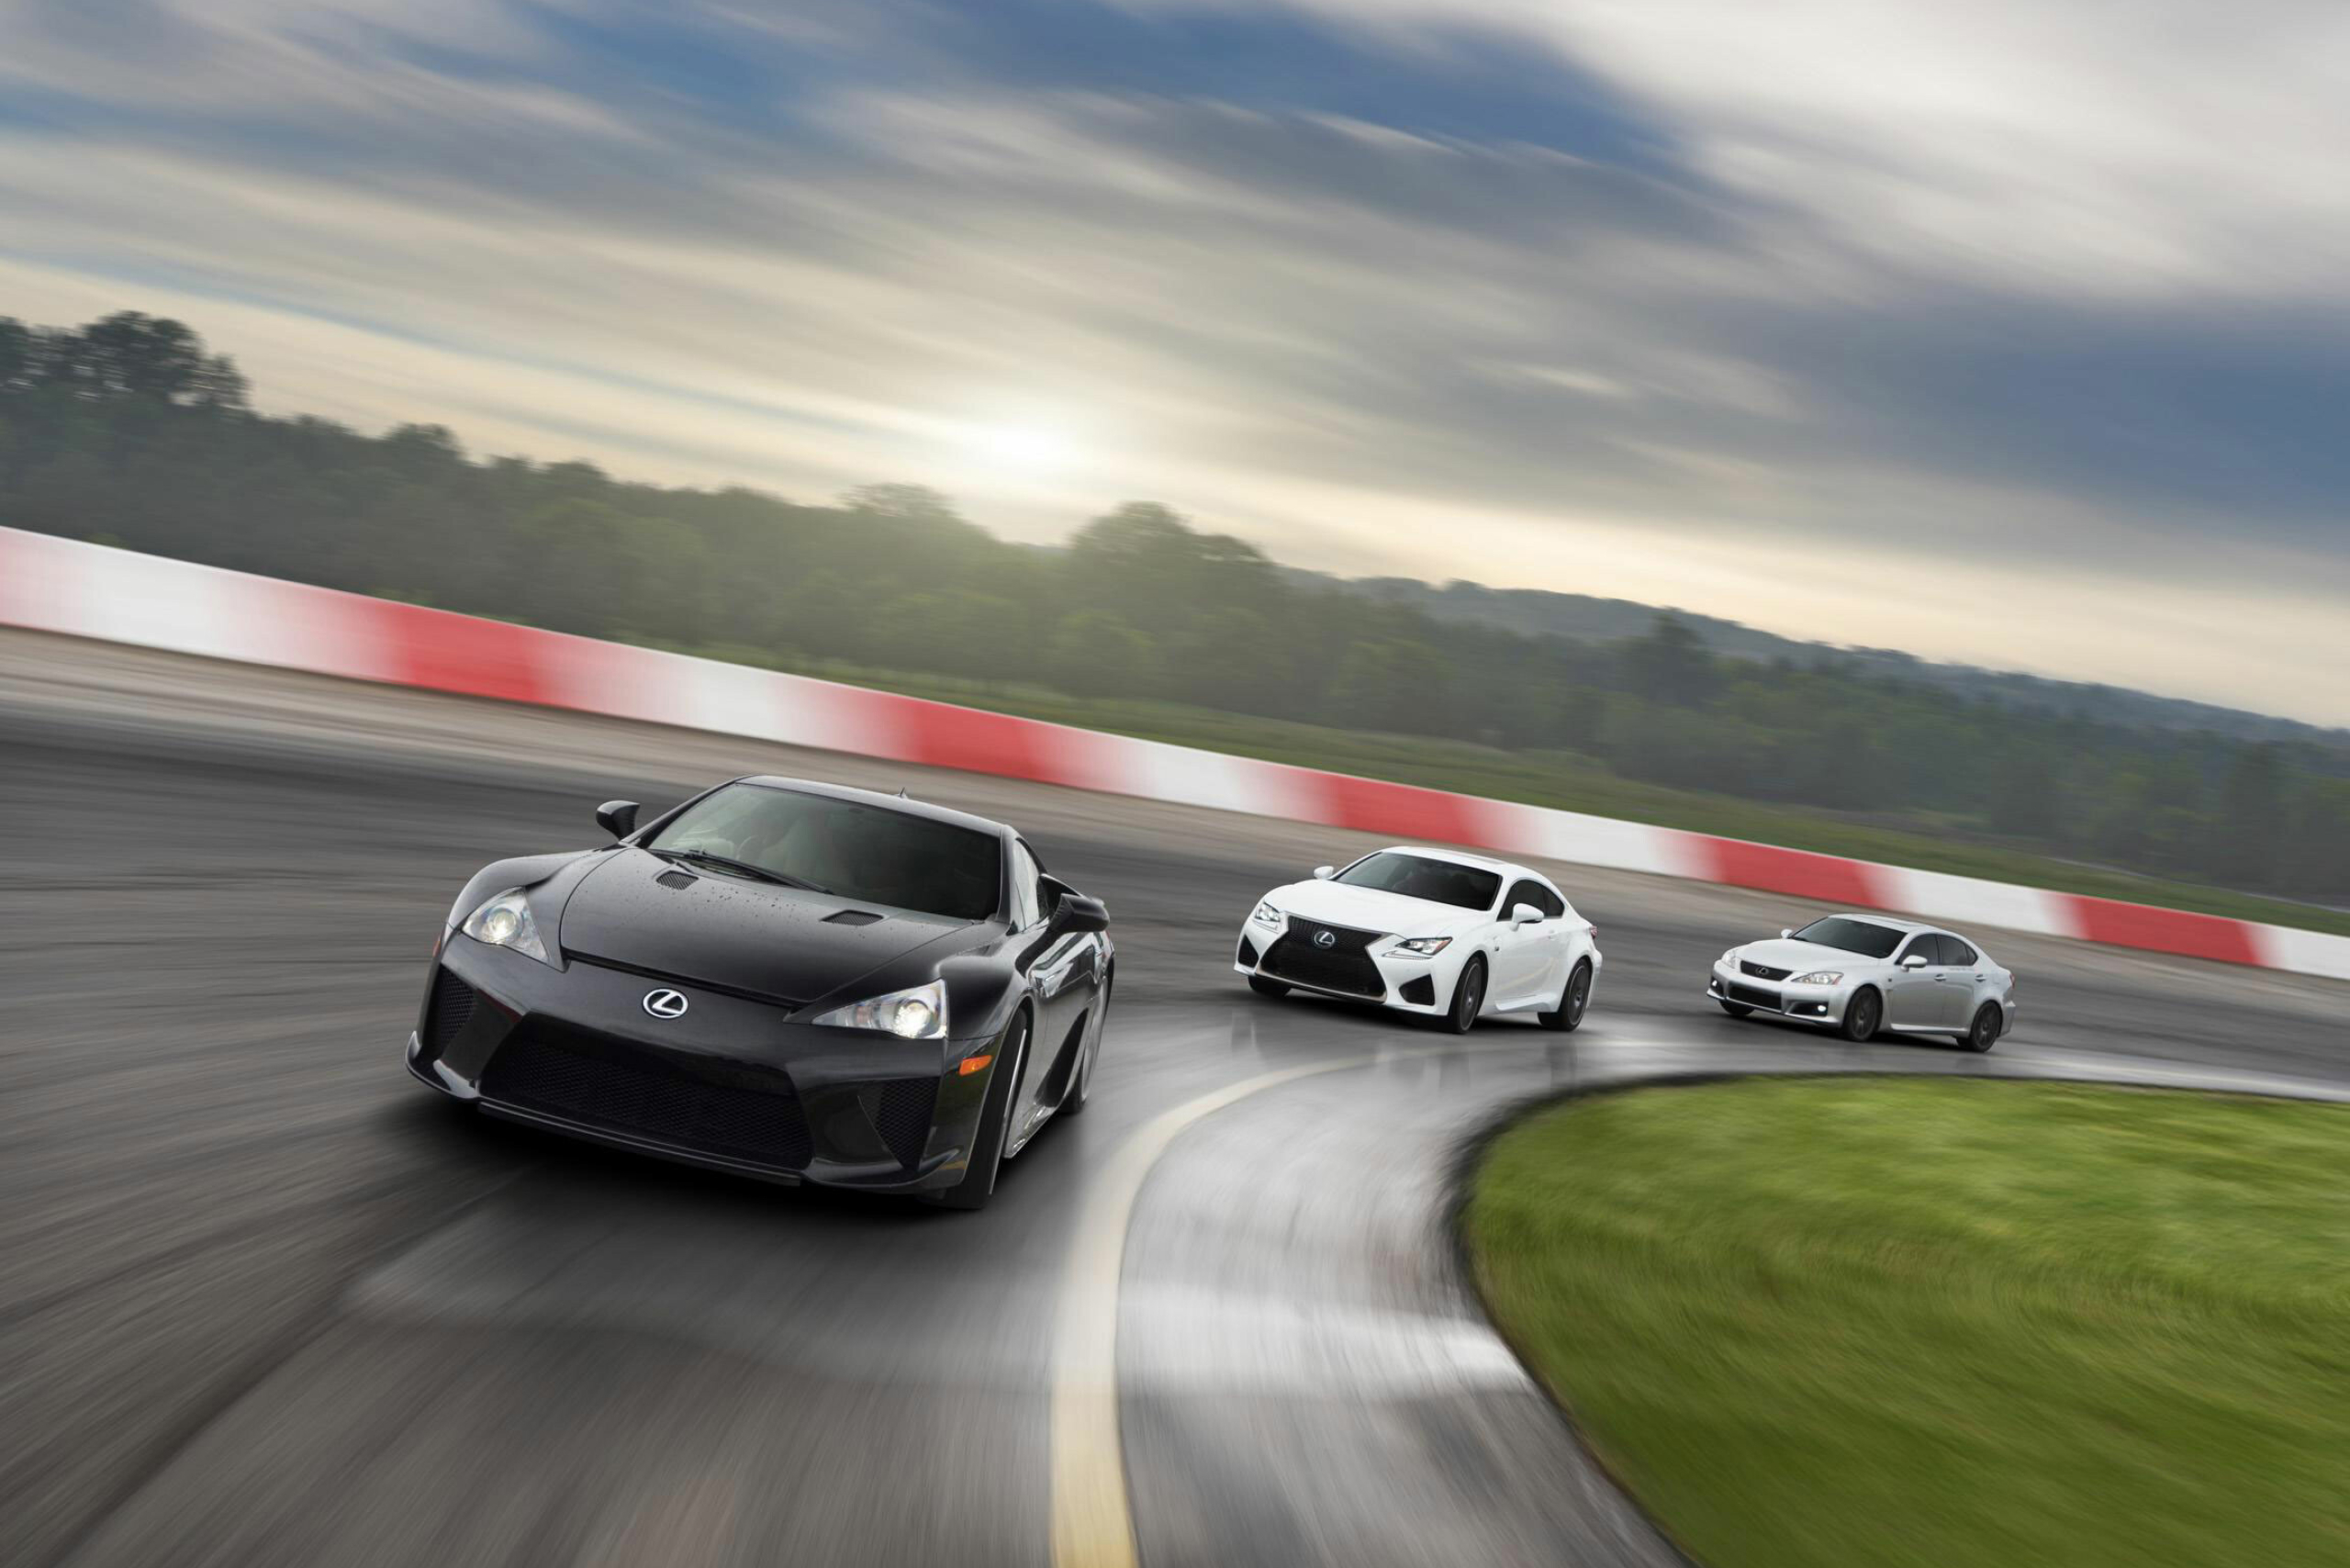 Lexus: The luxury vehicle brand of Toyota Motors, First introduced in 1989, LFA. 2560x1710 HD Wallpaper.